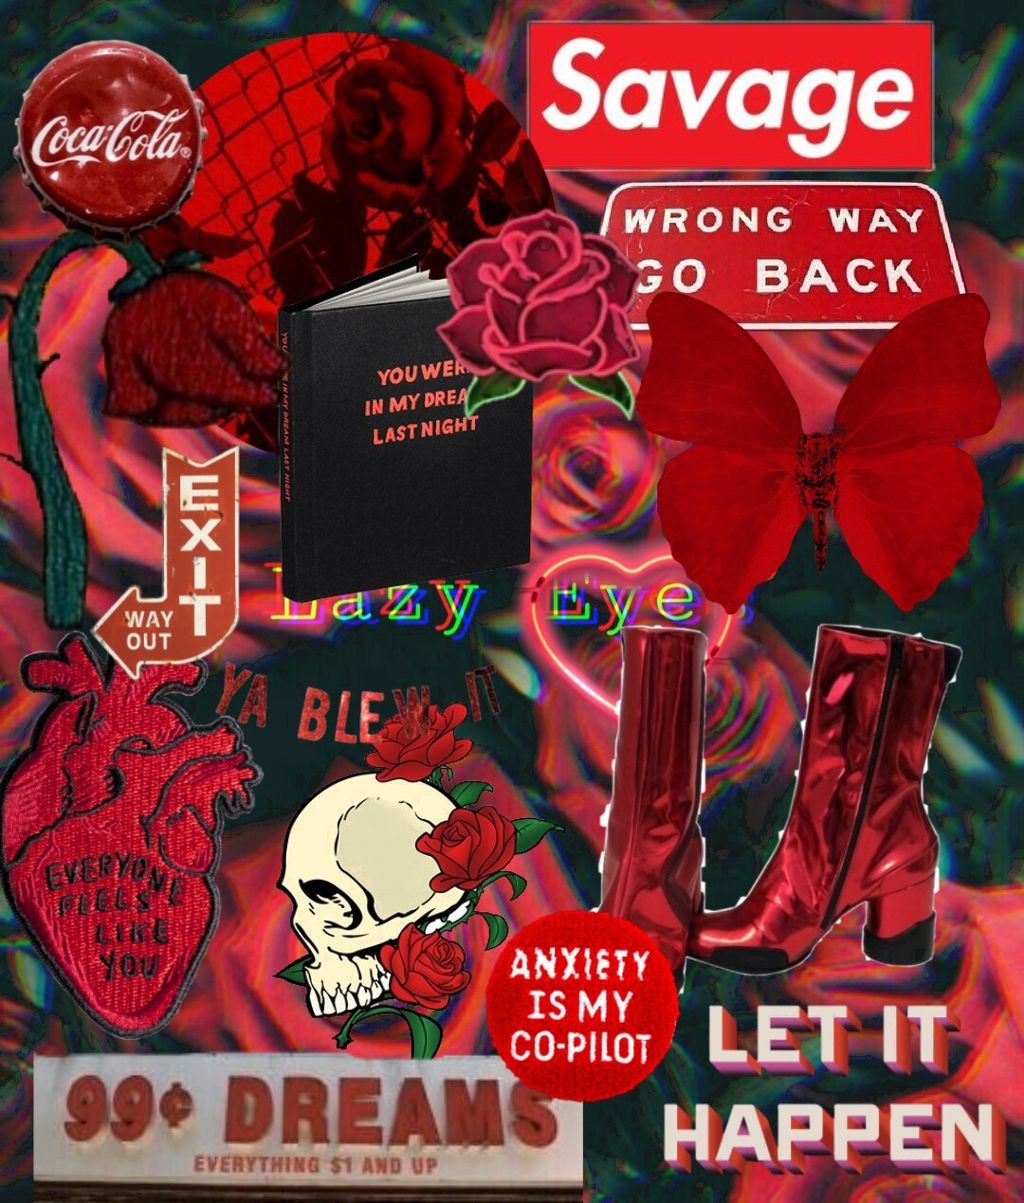 Aesthetic savage HD wallpapers